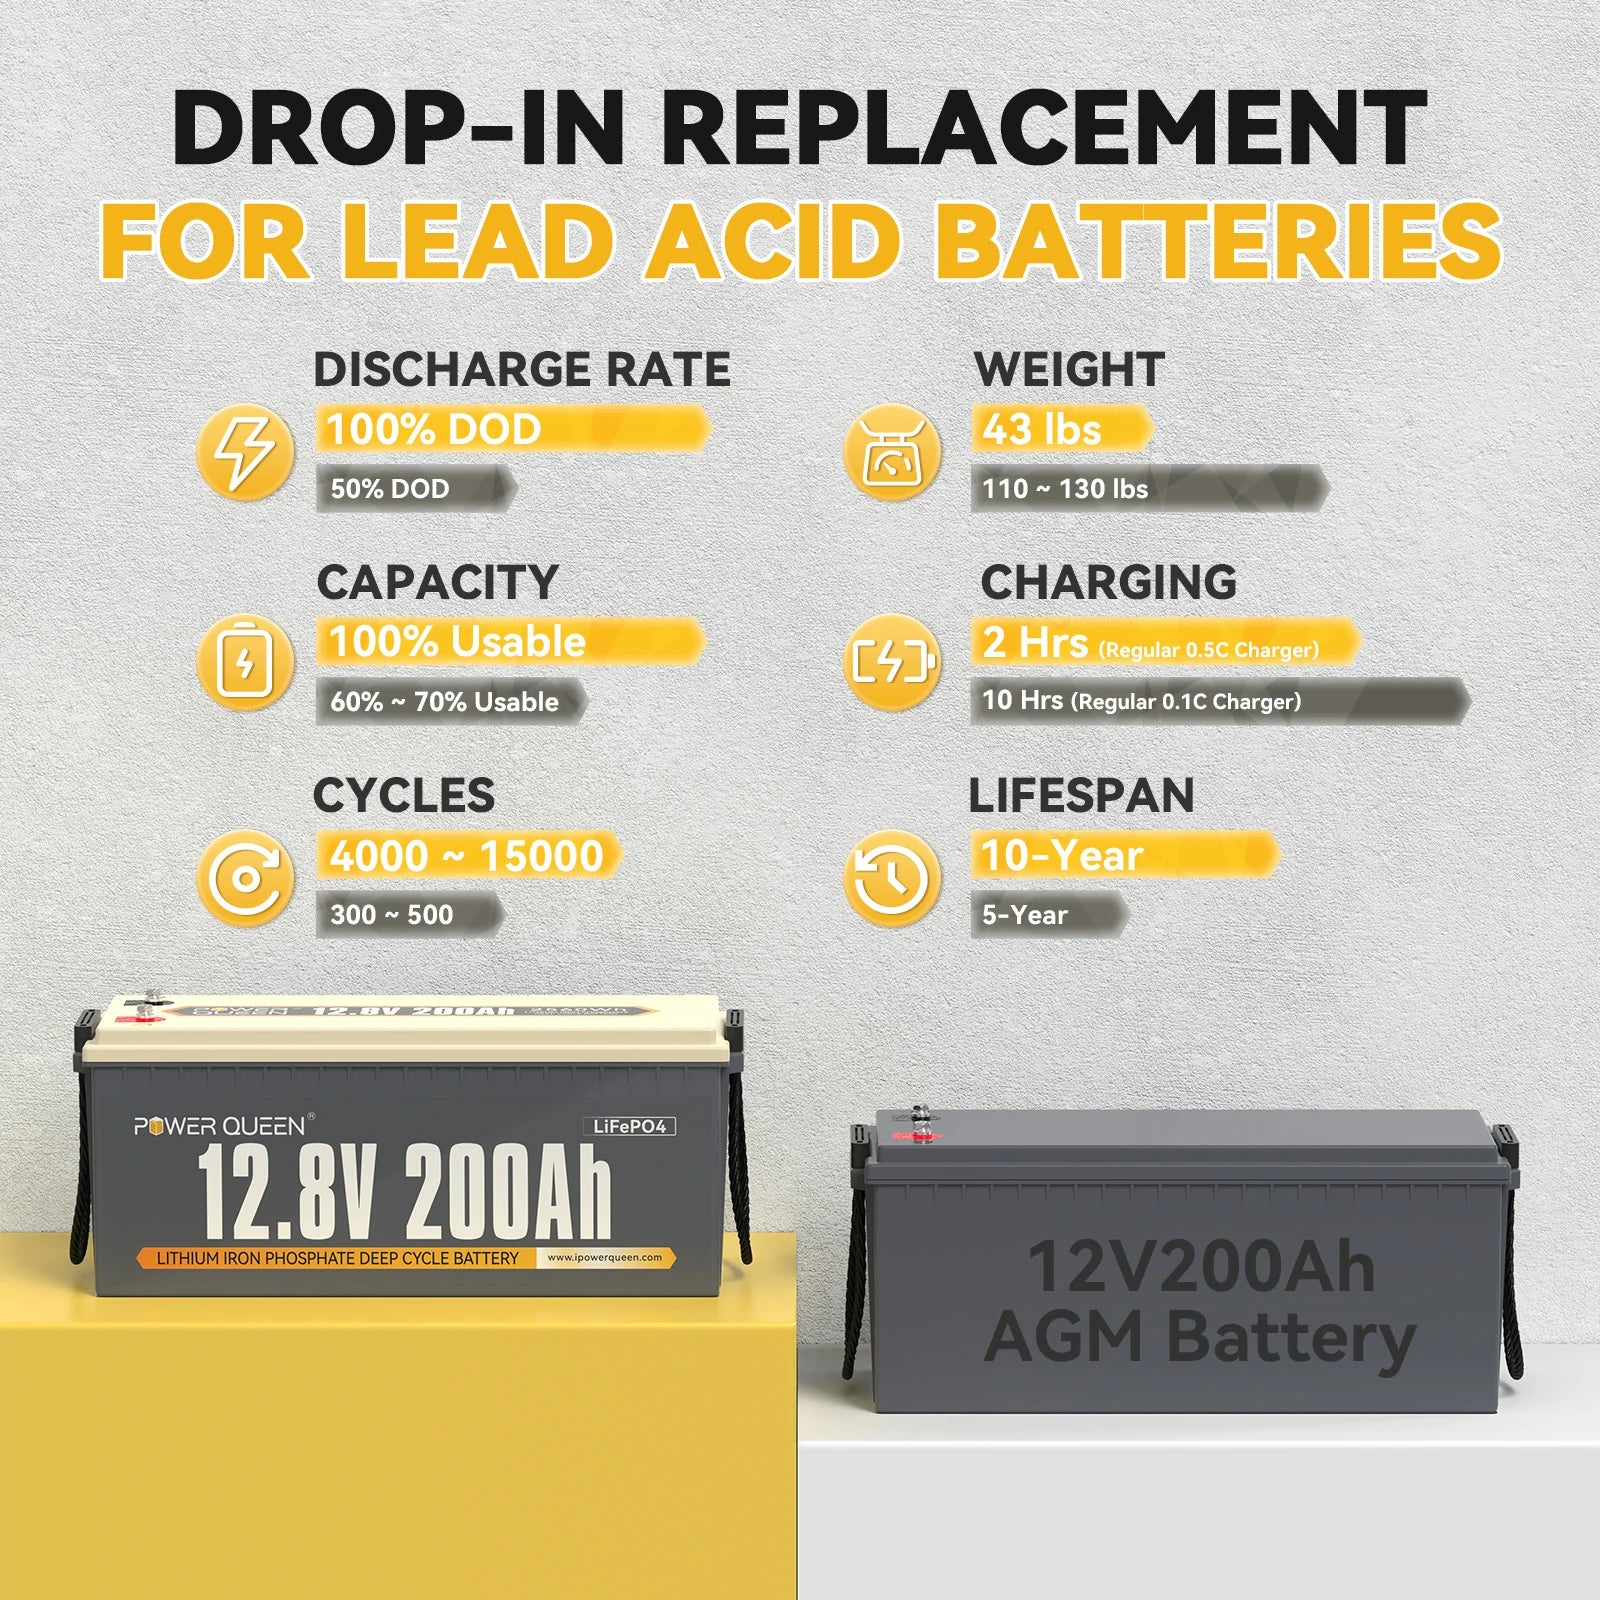     Power-Queen-12V200Ah-LiFepo4-battery-compared-with-Lead-acid-battery